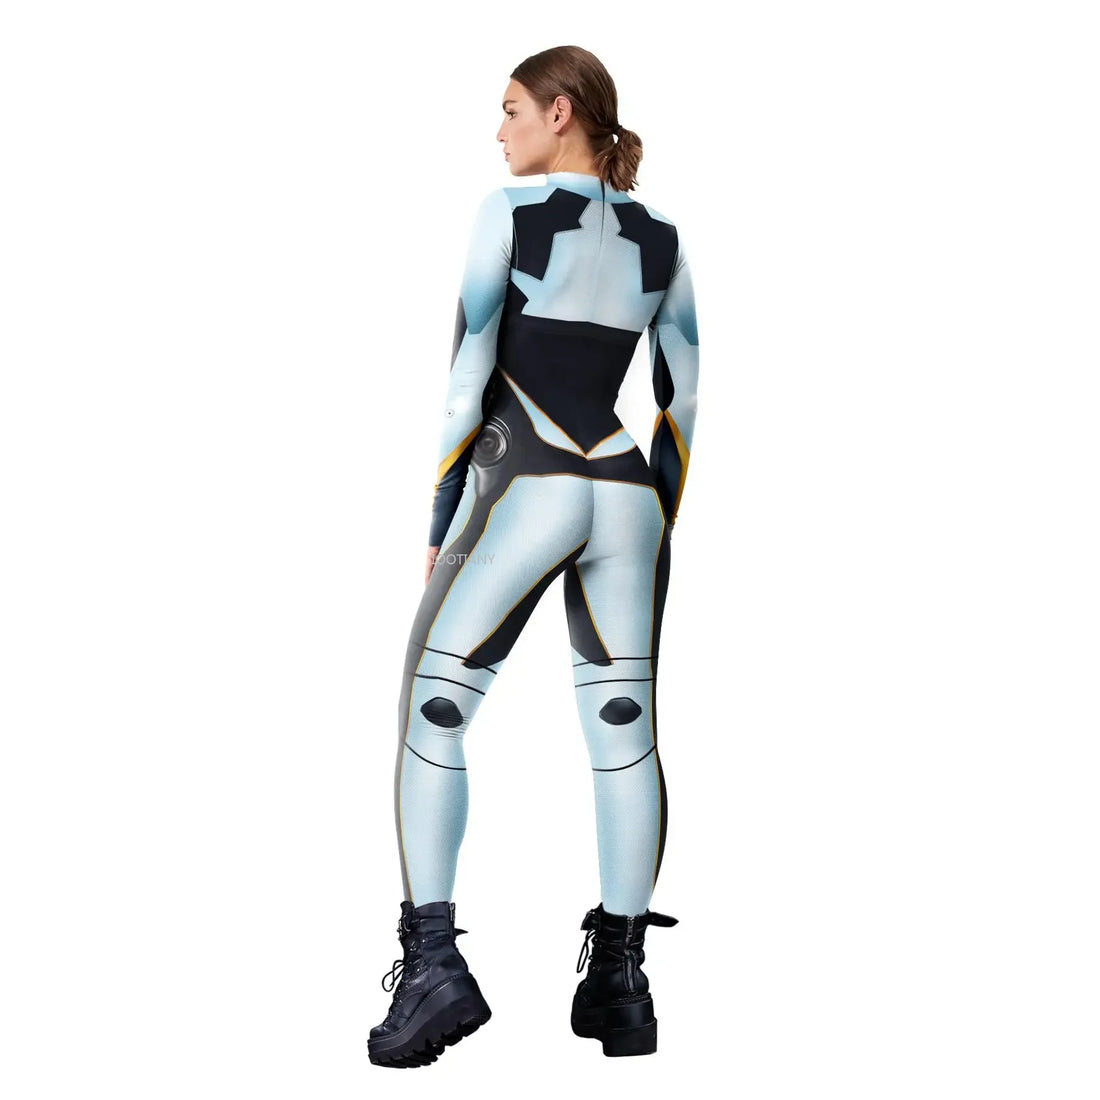 Women Bodysuit Halloween Purim Cosplay Robot Series Catsuits Festival Party Zentai Tight Clothes 3d Printed Performance Costumes